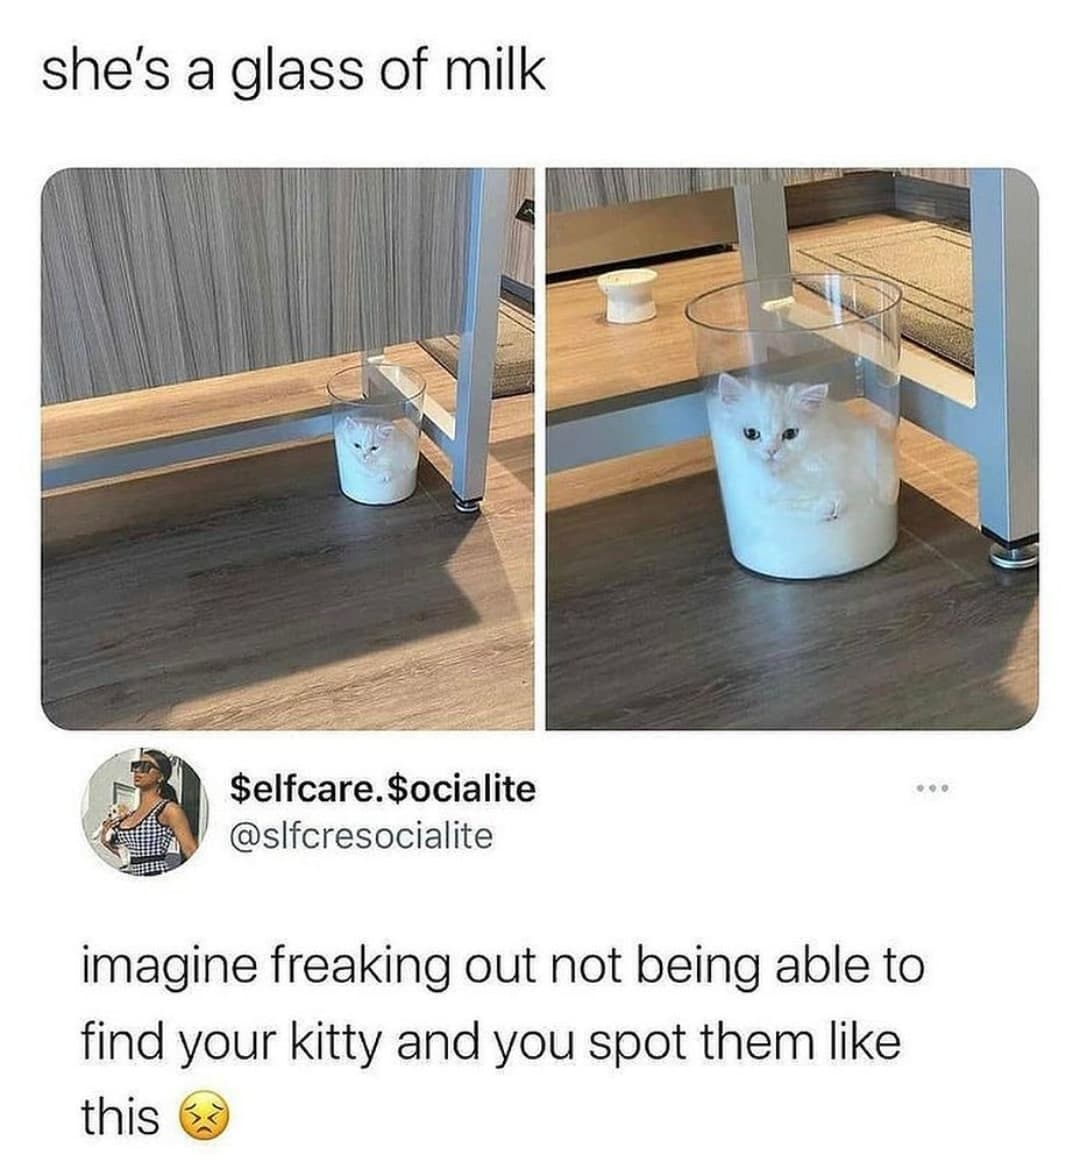 floor - she's a glass of milk $elfcare. $ocialite imagine freaking out not being able to find your kitty and you spot them this